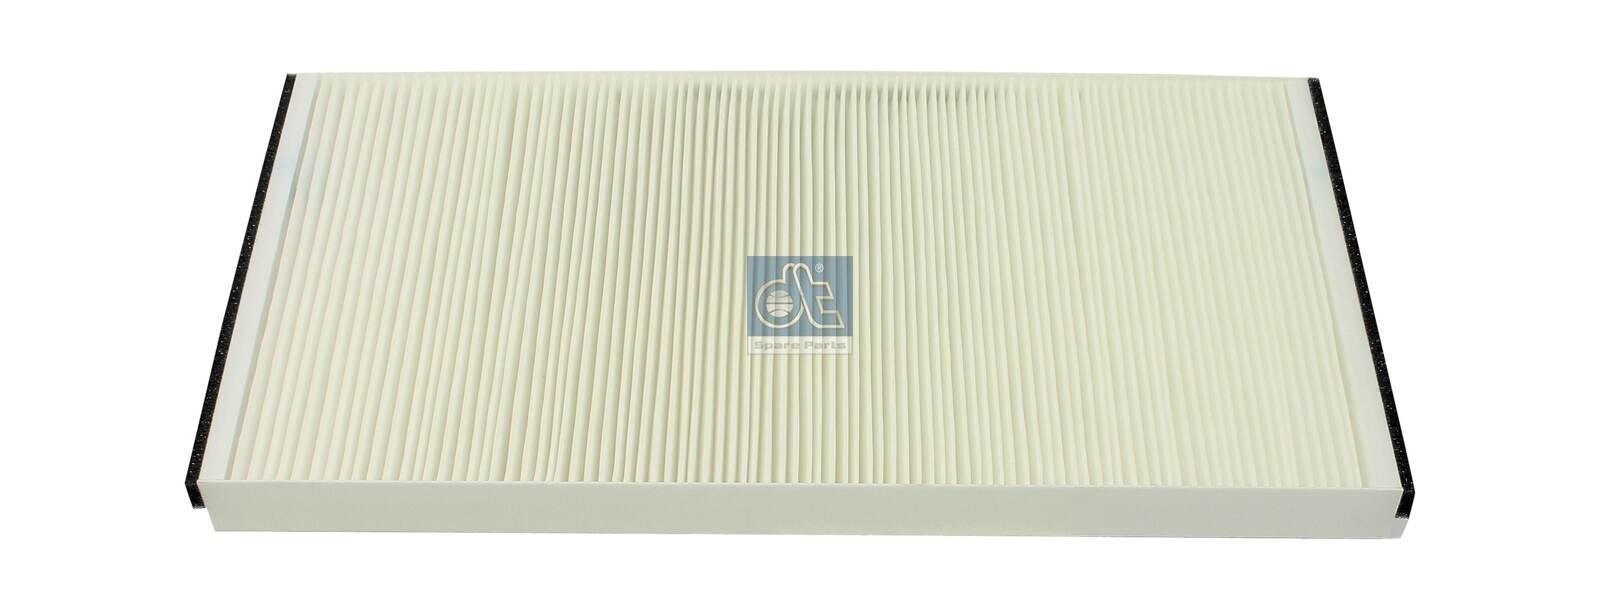 CU 45 120 DT Spare Parts 3.82000 Air filter 36779100020